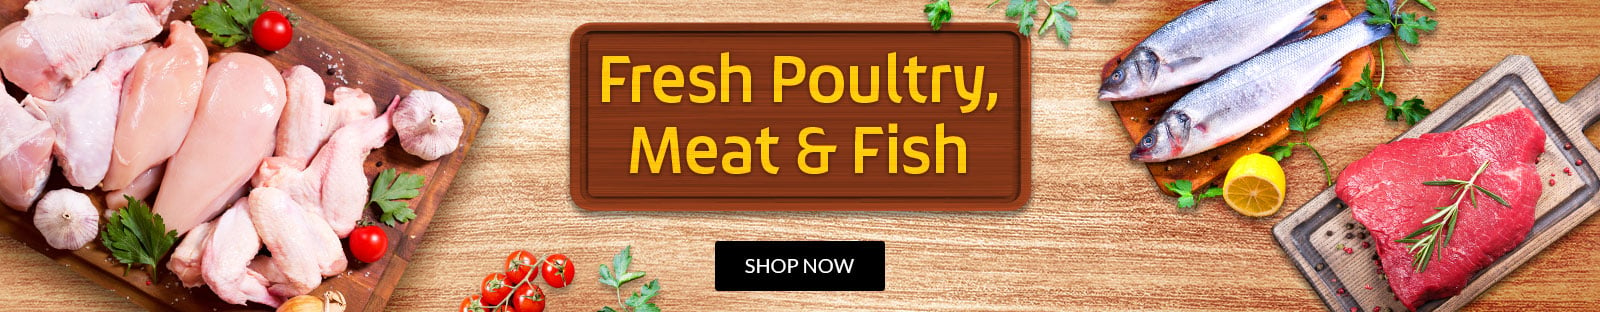 Fresh Poultry Meat and fish